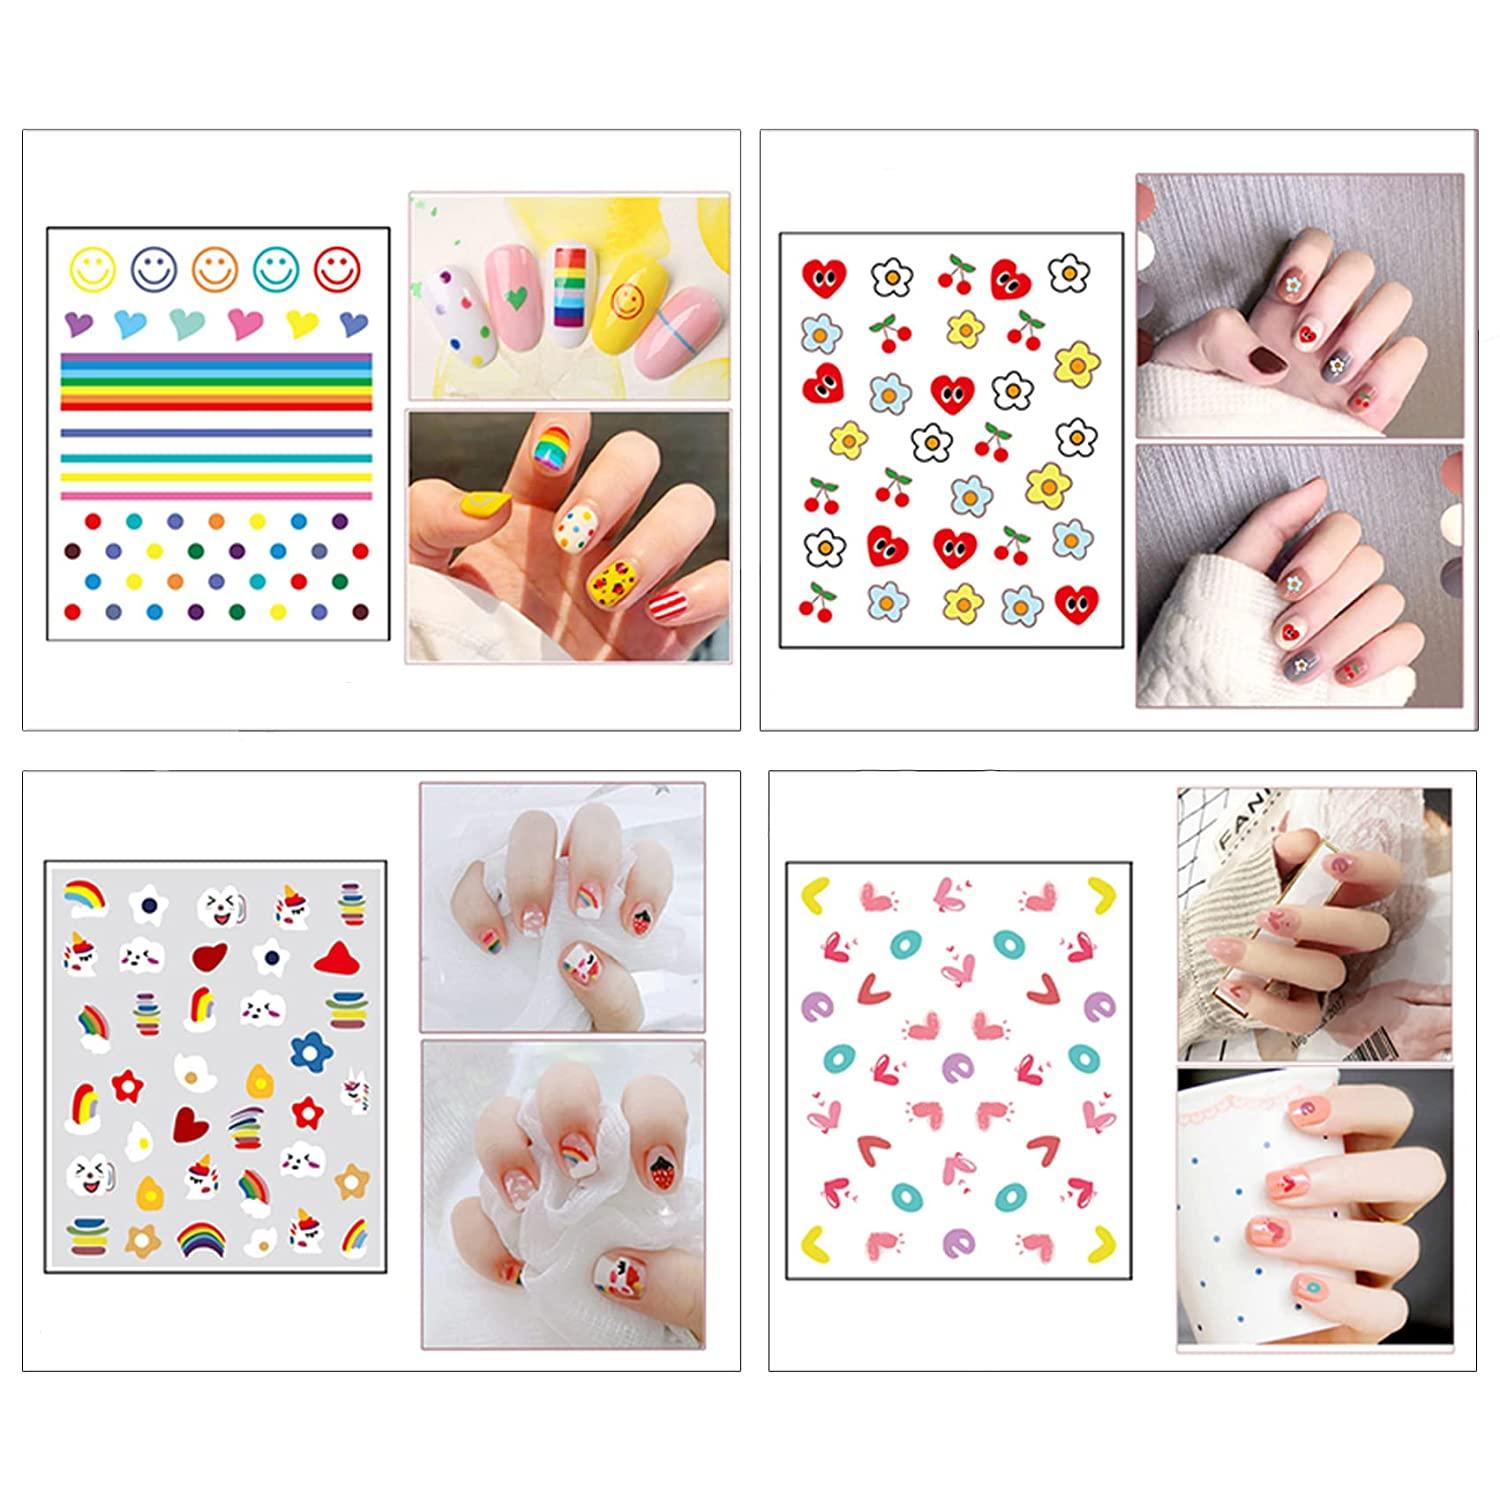 SOGAYU 16 Sheets Nail Stickers for Kids, Cute Self-Adhesive Nail Art Decals  for Girls Women – 3D Designs DIY Manicure Accessories Include Fruits  Flowers Leaves Rainbow Plants etc 16 Sheets , Kids